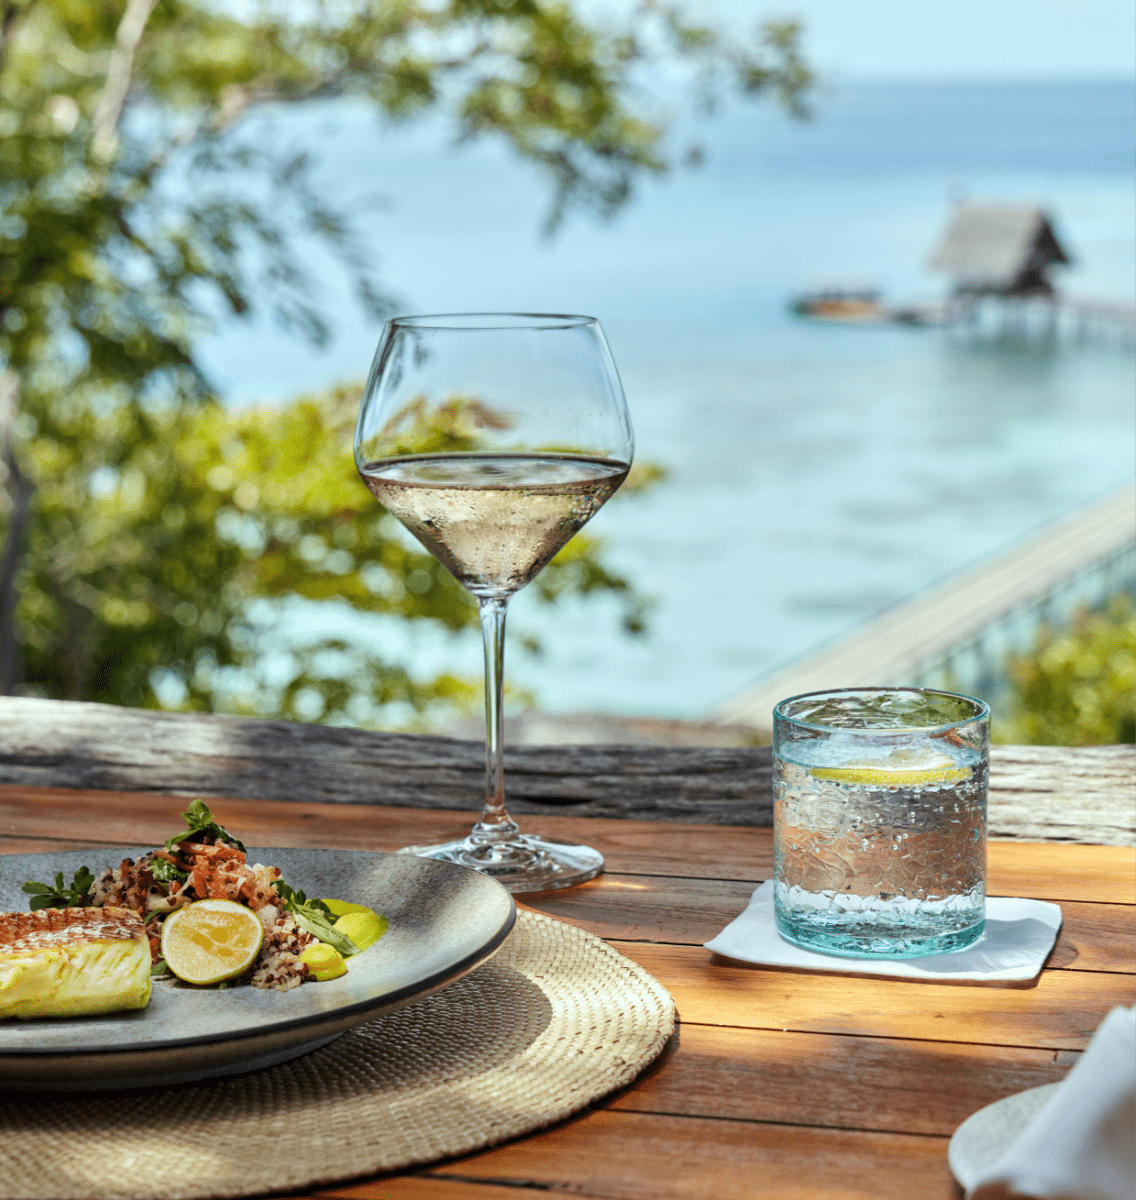 Treetops hotel restaurant on private island Bawah Reserve, Indonesia. Wine and lunch with a view.